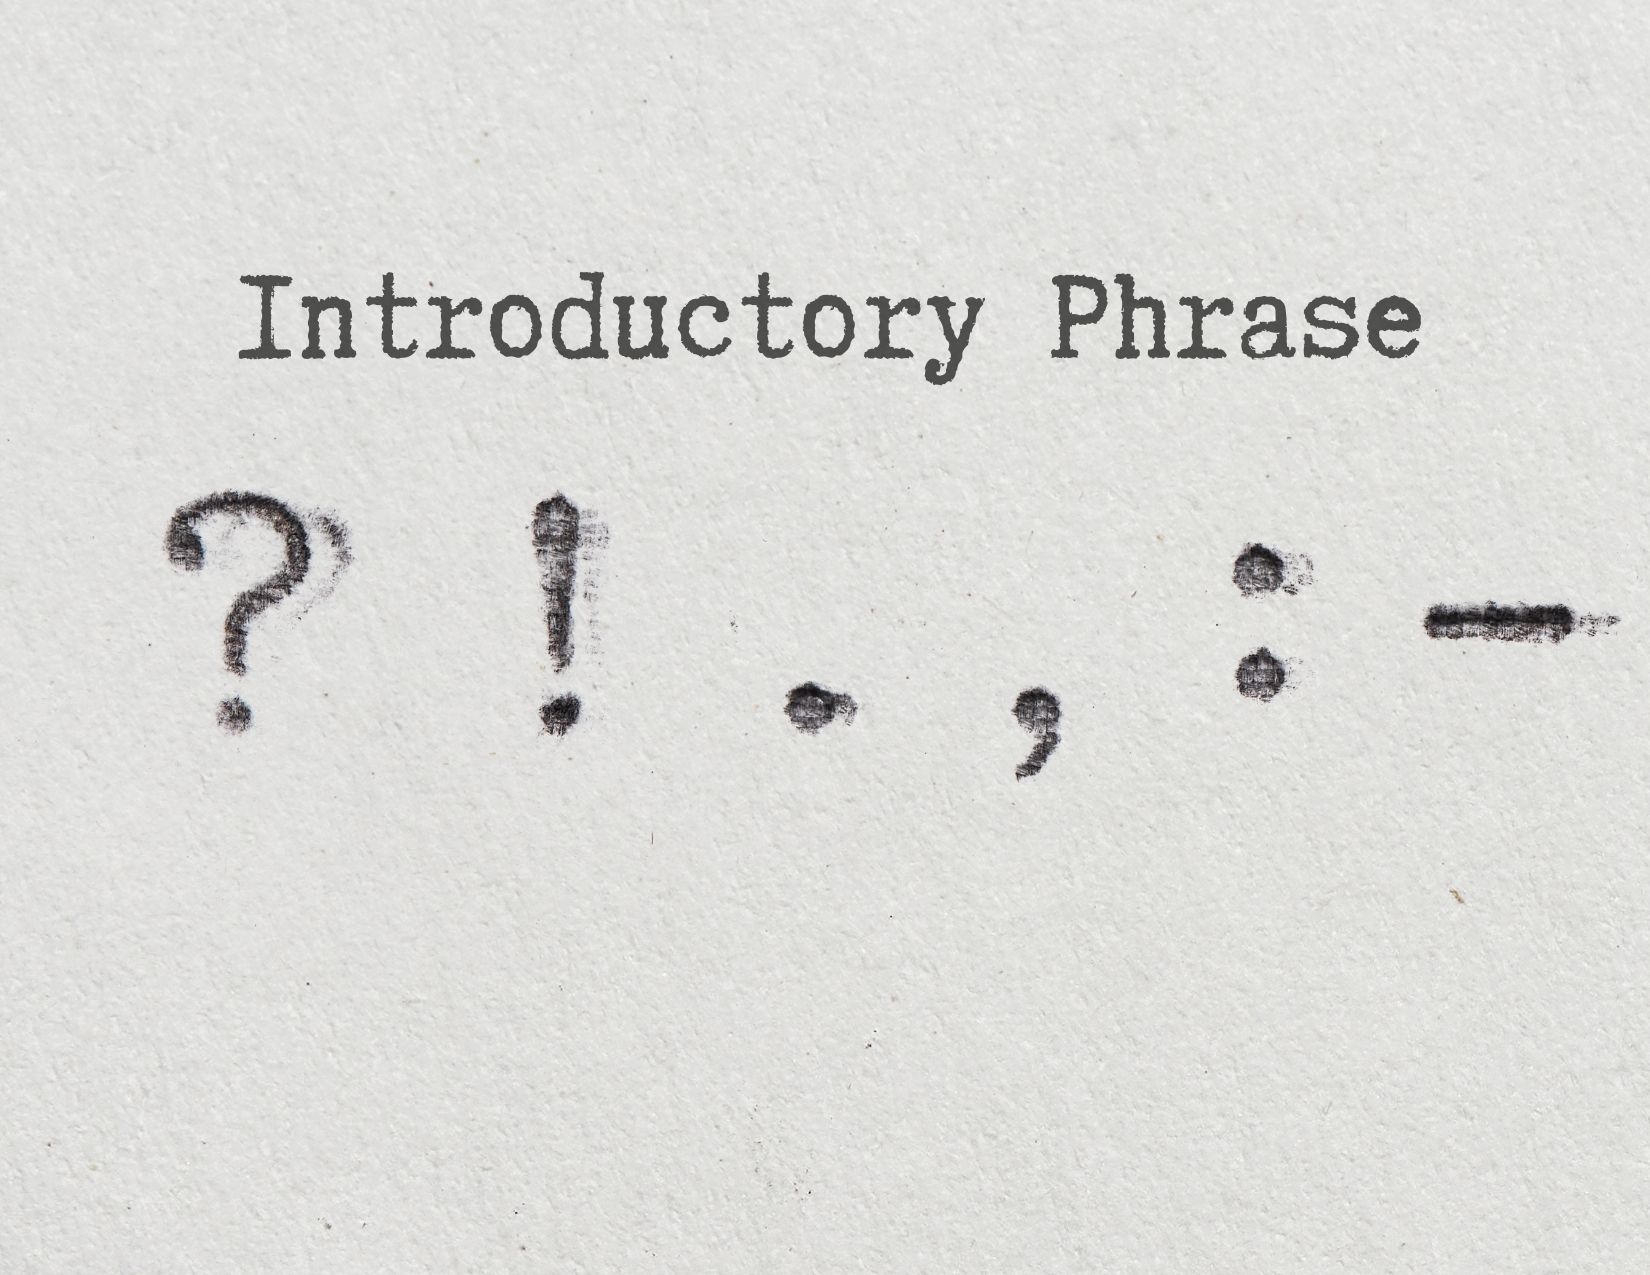 Image showing the words Introductory Phrase followed by various punctuation marks: question mark, exclamation point, period, comma, etc.